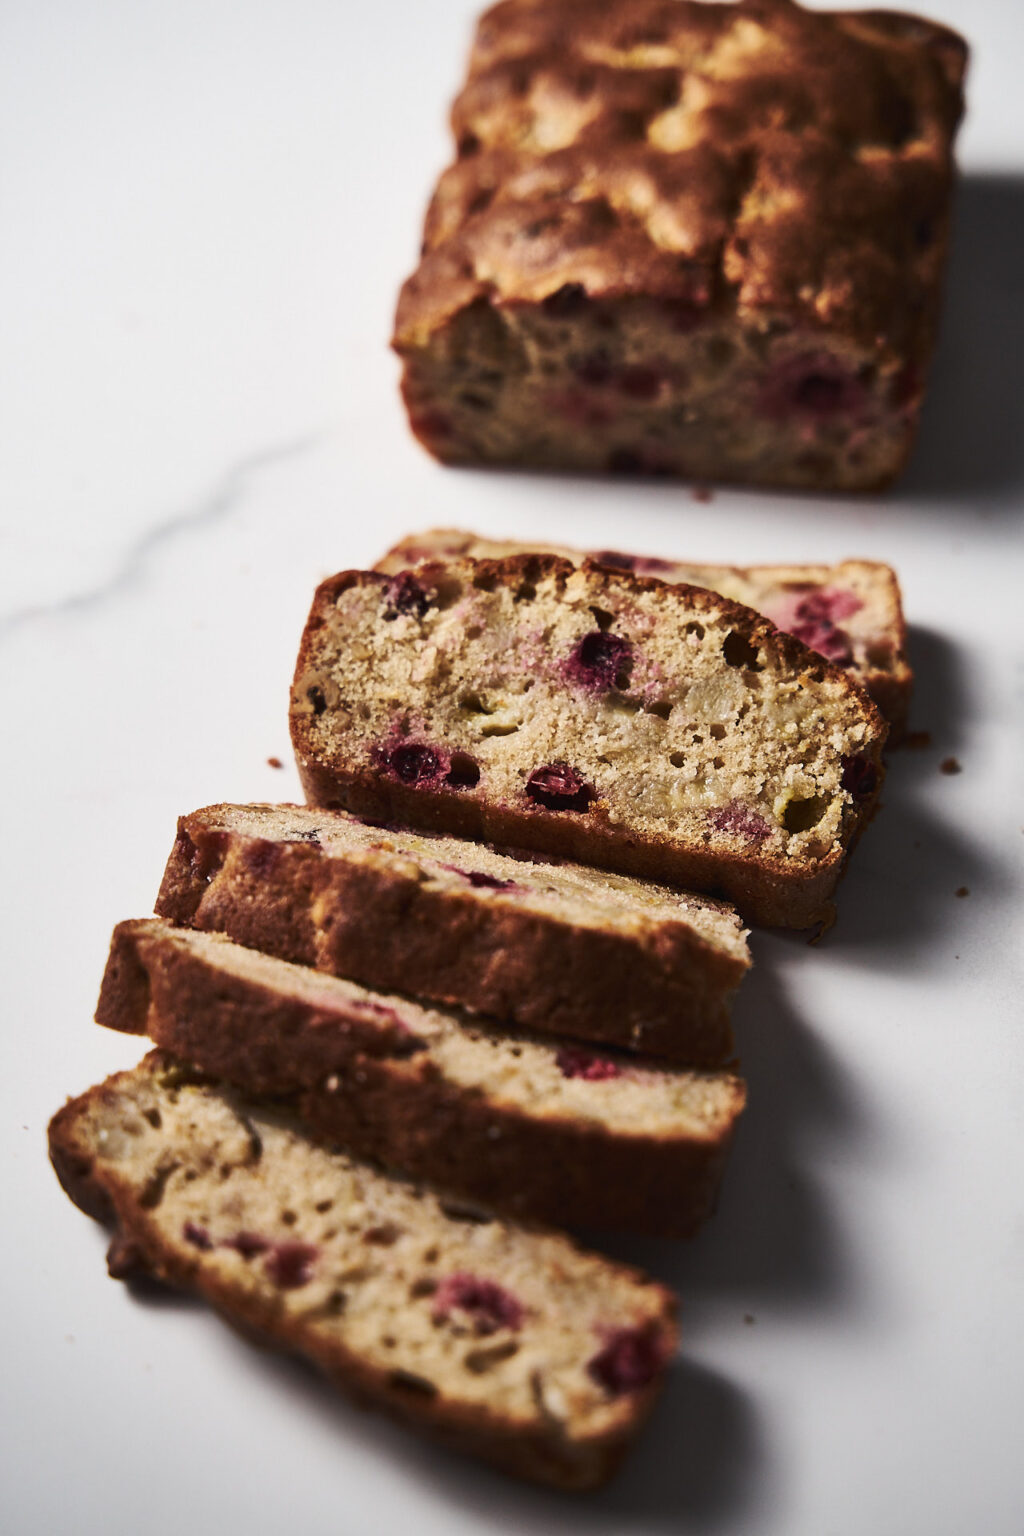 Sliced Banana Bread with cranberries and walnuts